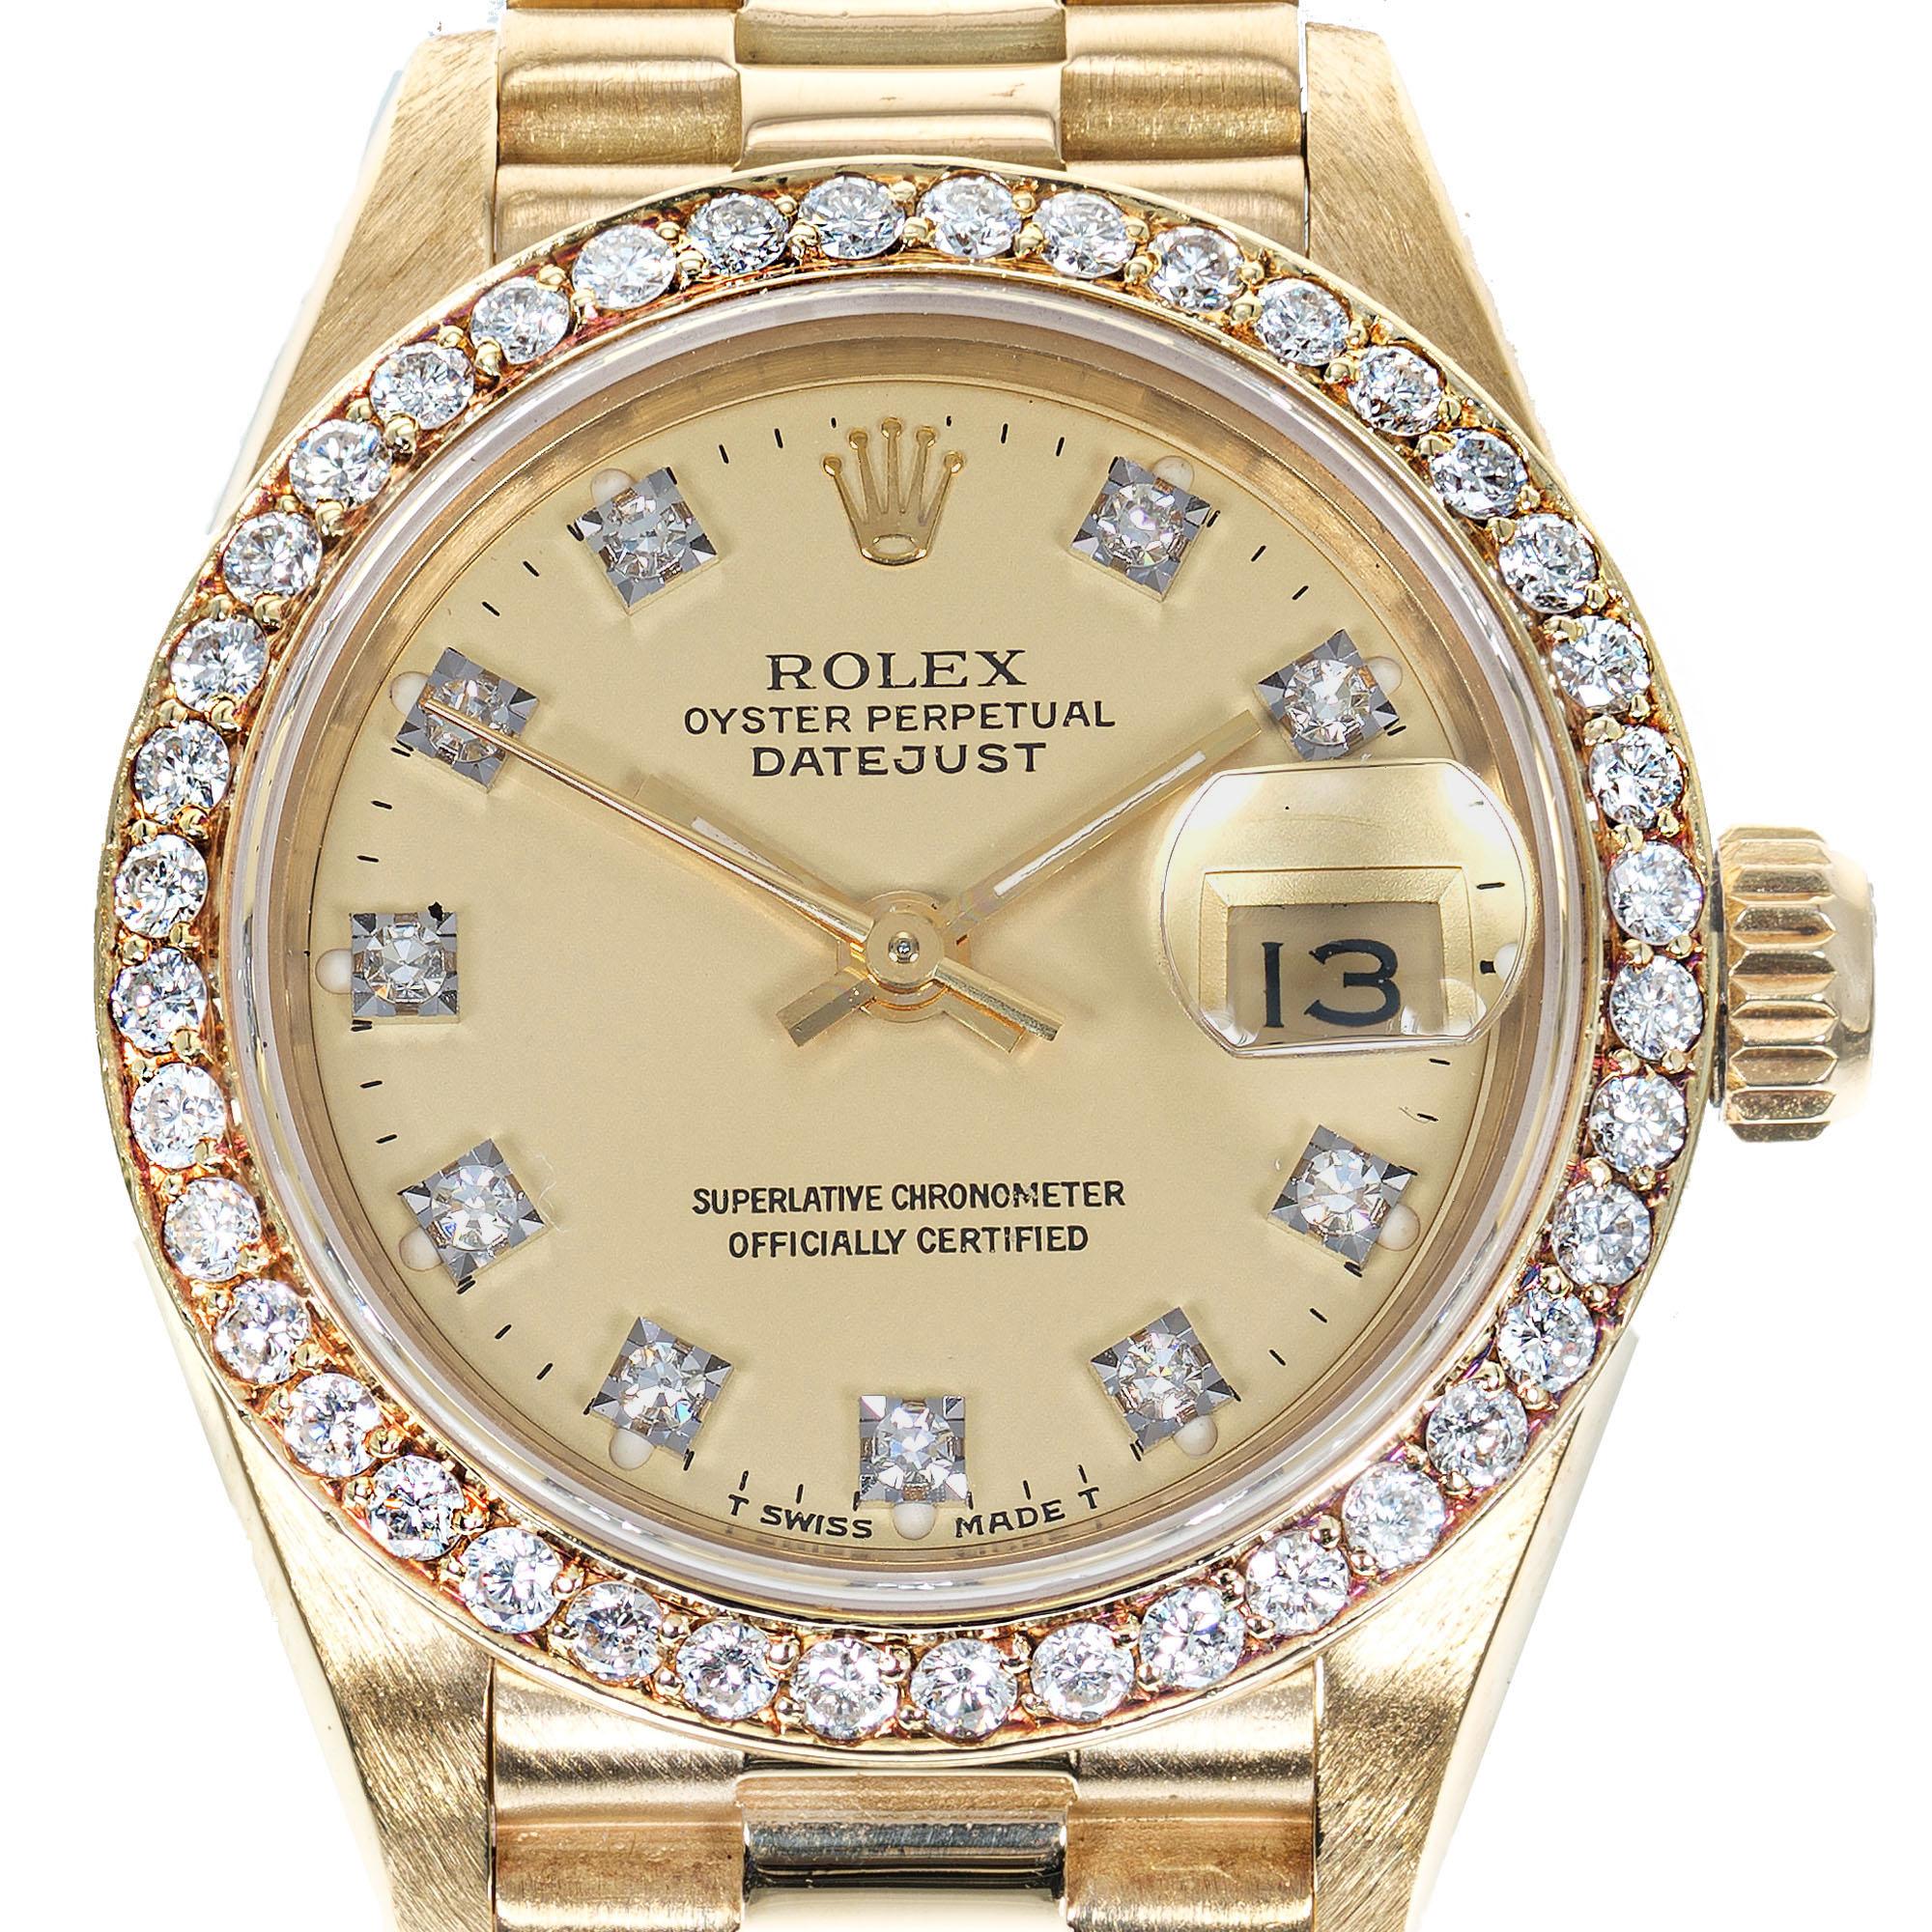 Rolex Lady's 18k Yellow Gold and Diamond Datejust Wristwatch Ref 69138, with gilt diamond halo dial, circa 1985. 6.75 inches. 

18k yellow gold
Length: 6.75 inches
Length: 32.87mm
Width: 26mm
Bracelet width at case: 13mm
Case thickness: